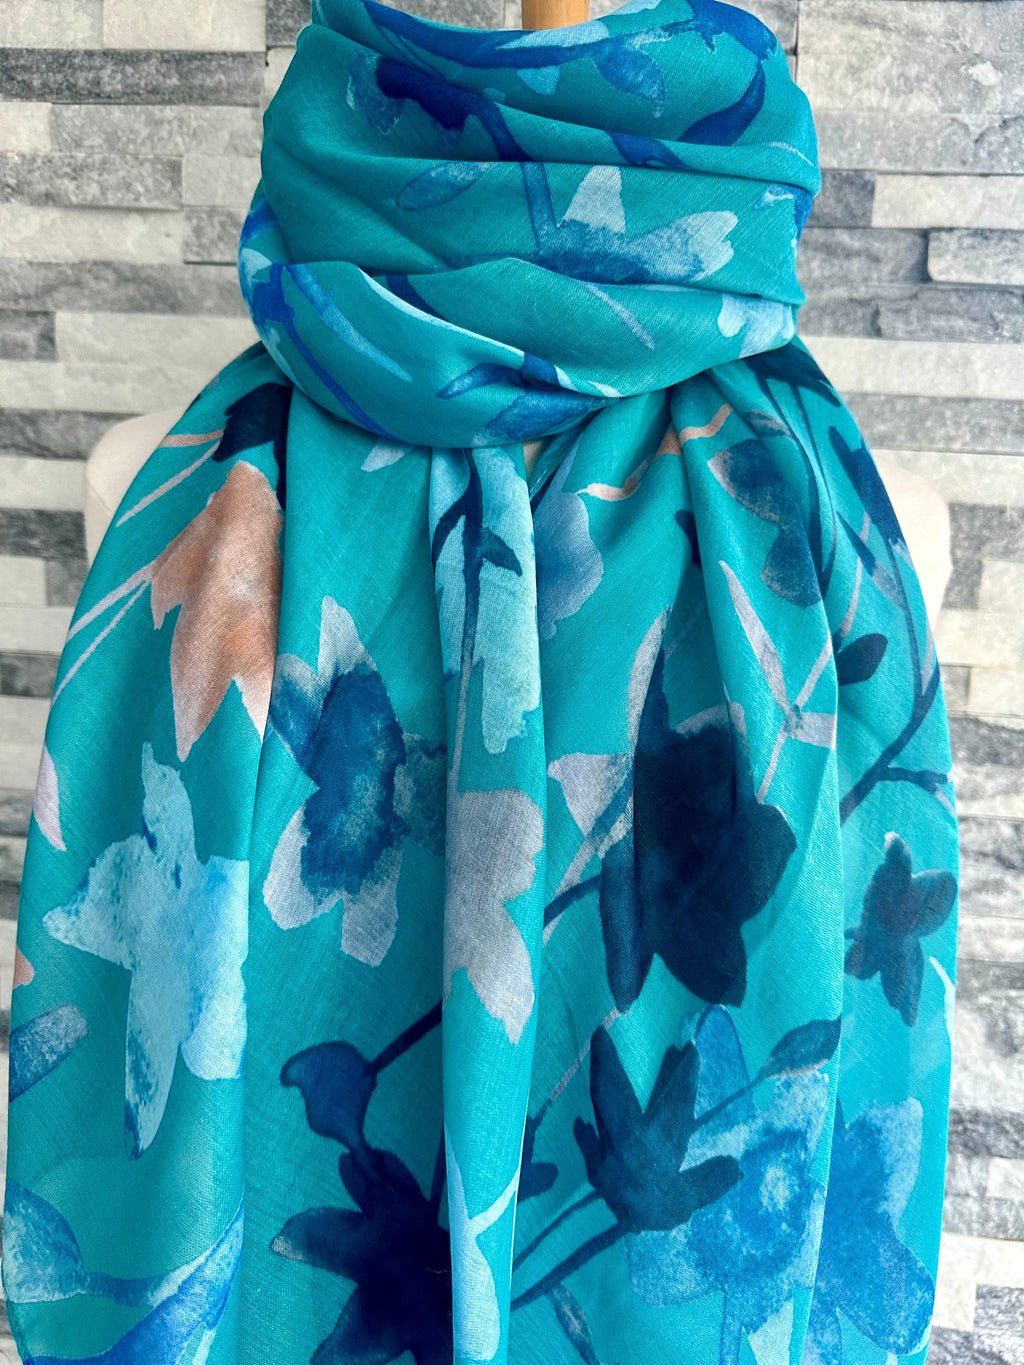 lusciousscarves Ladies Water coloured Floral Silhouettes Scarf, Turquoise, Blue and Navy.